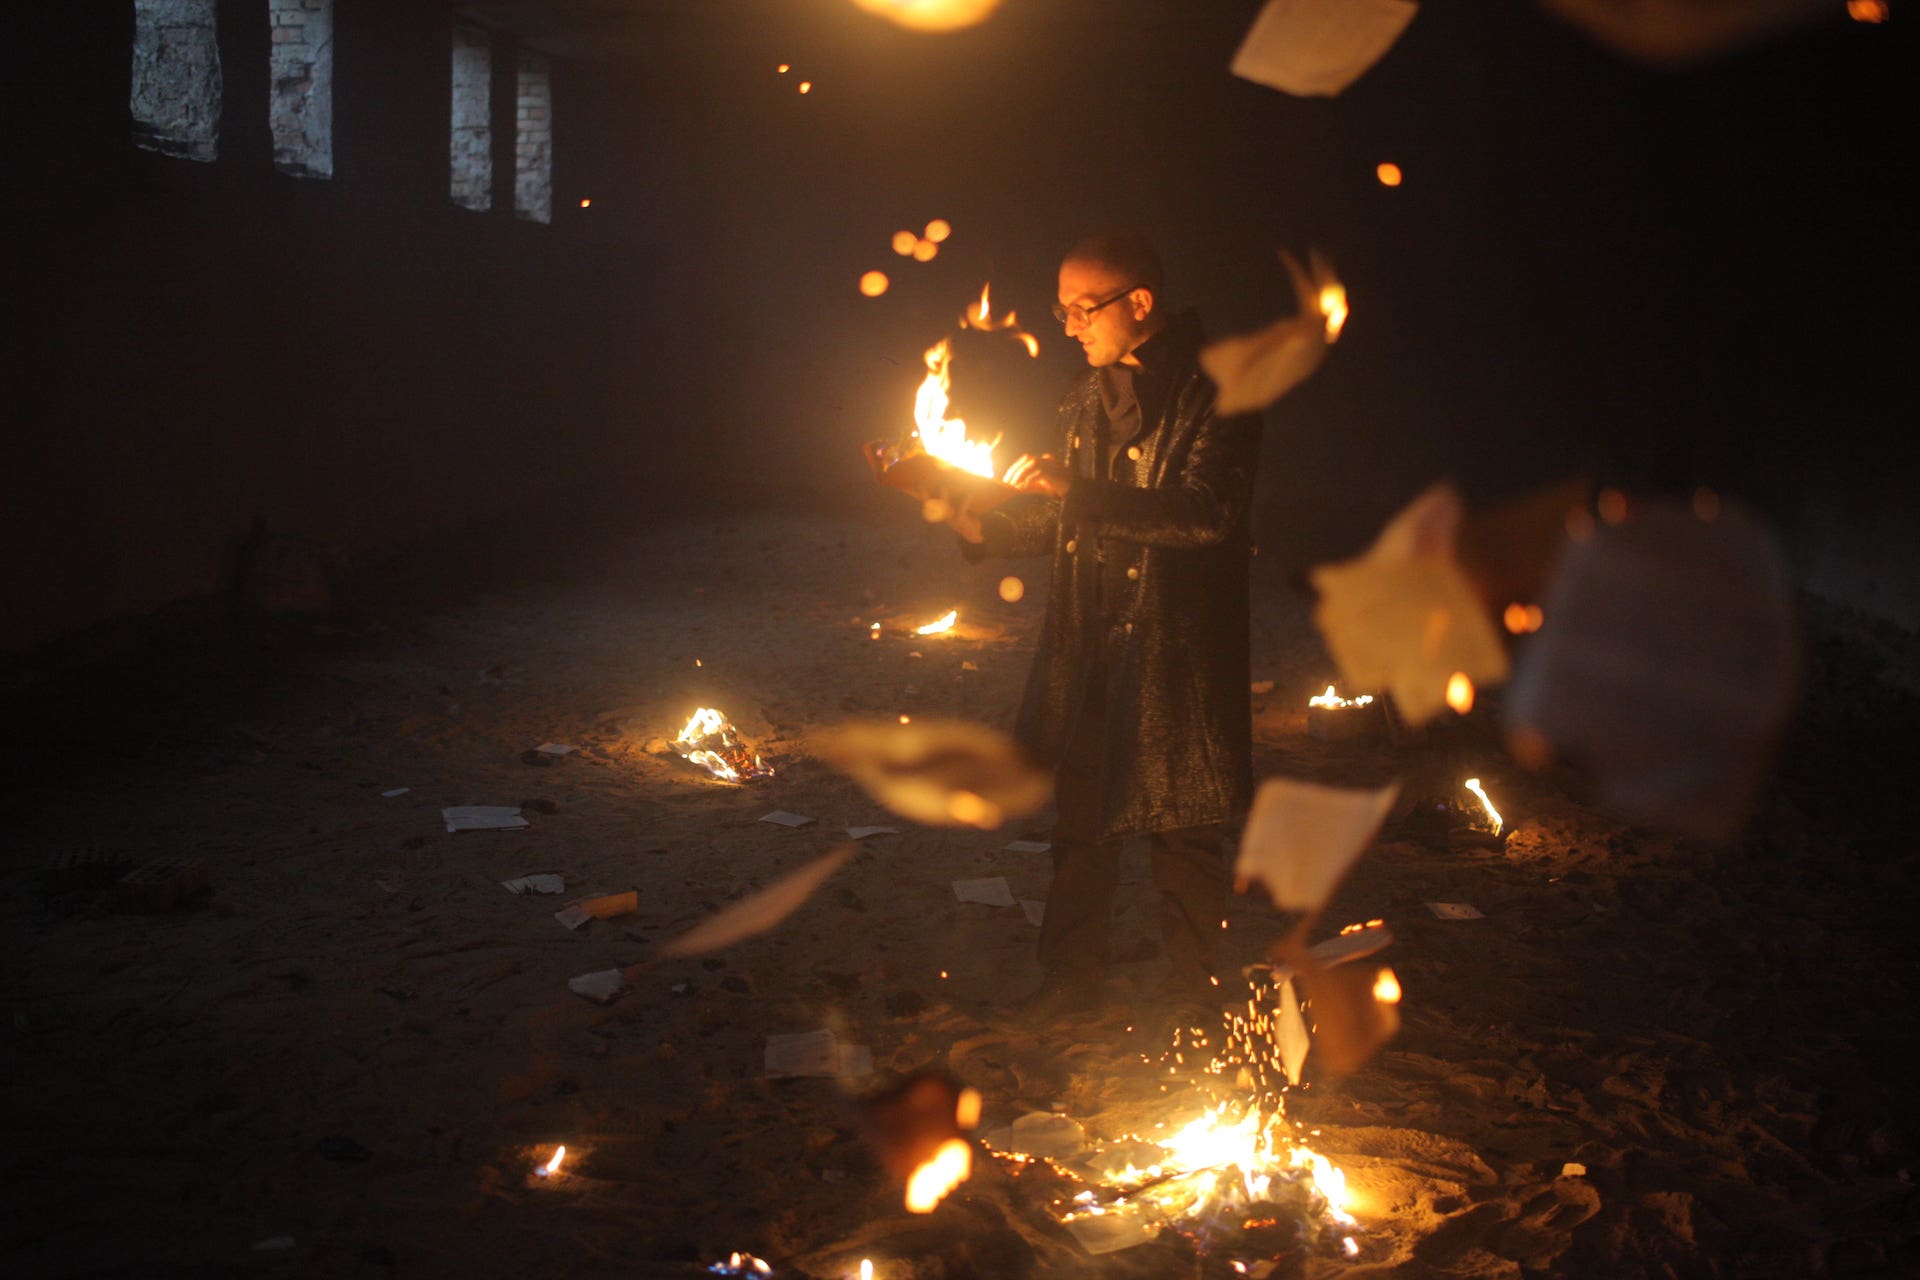 A performer is burning books in a dark room full of sand